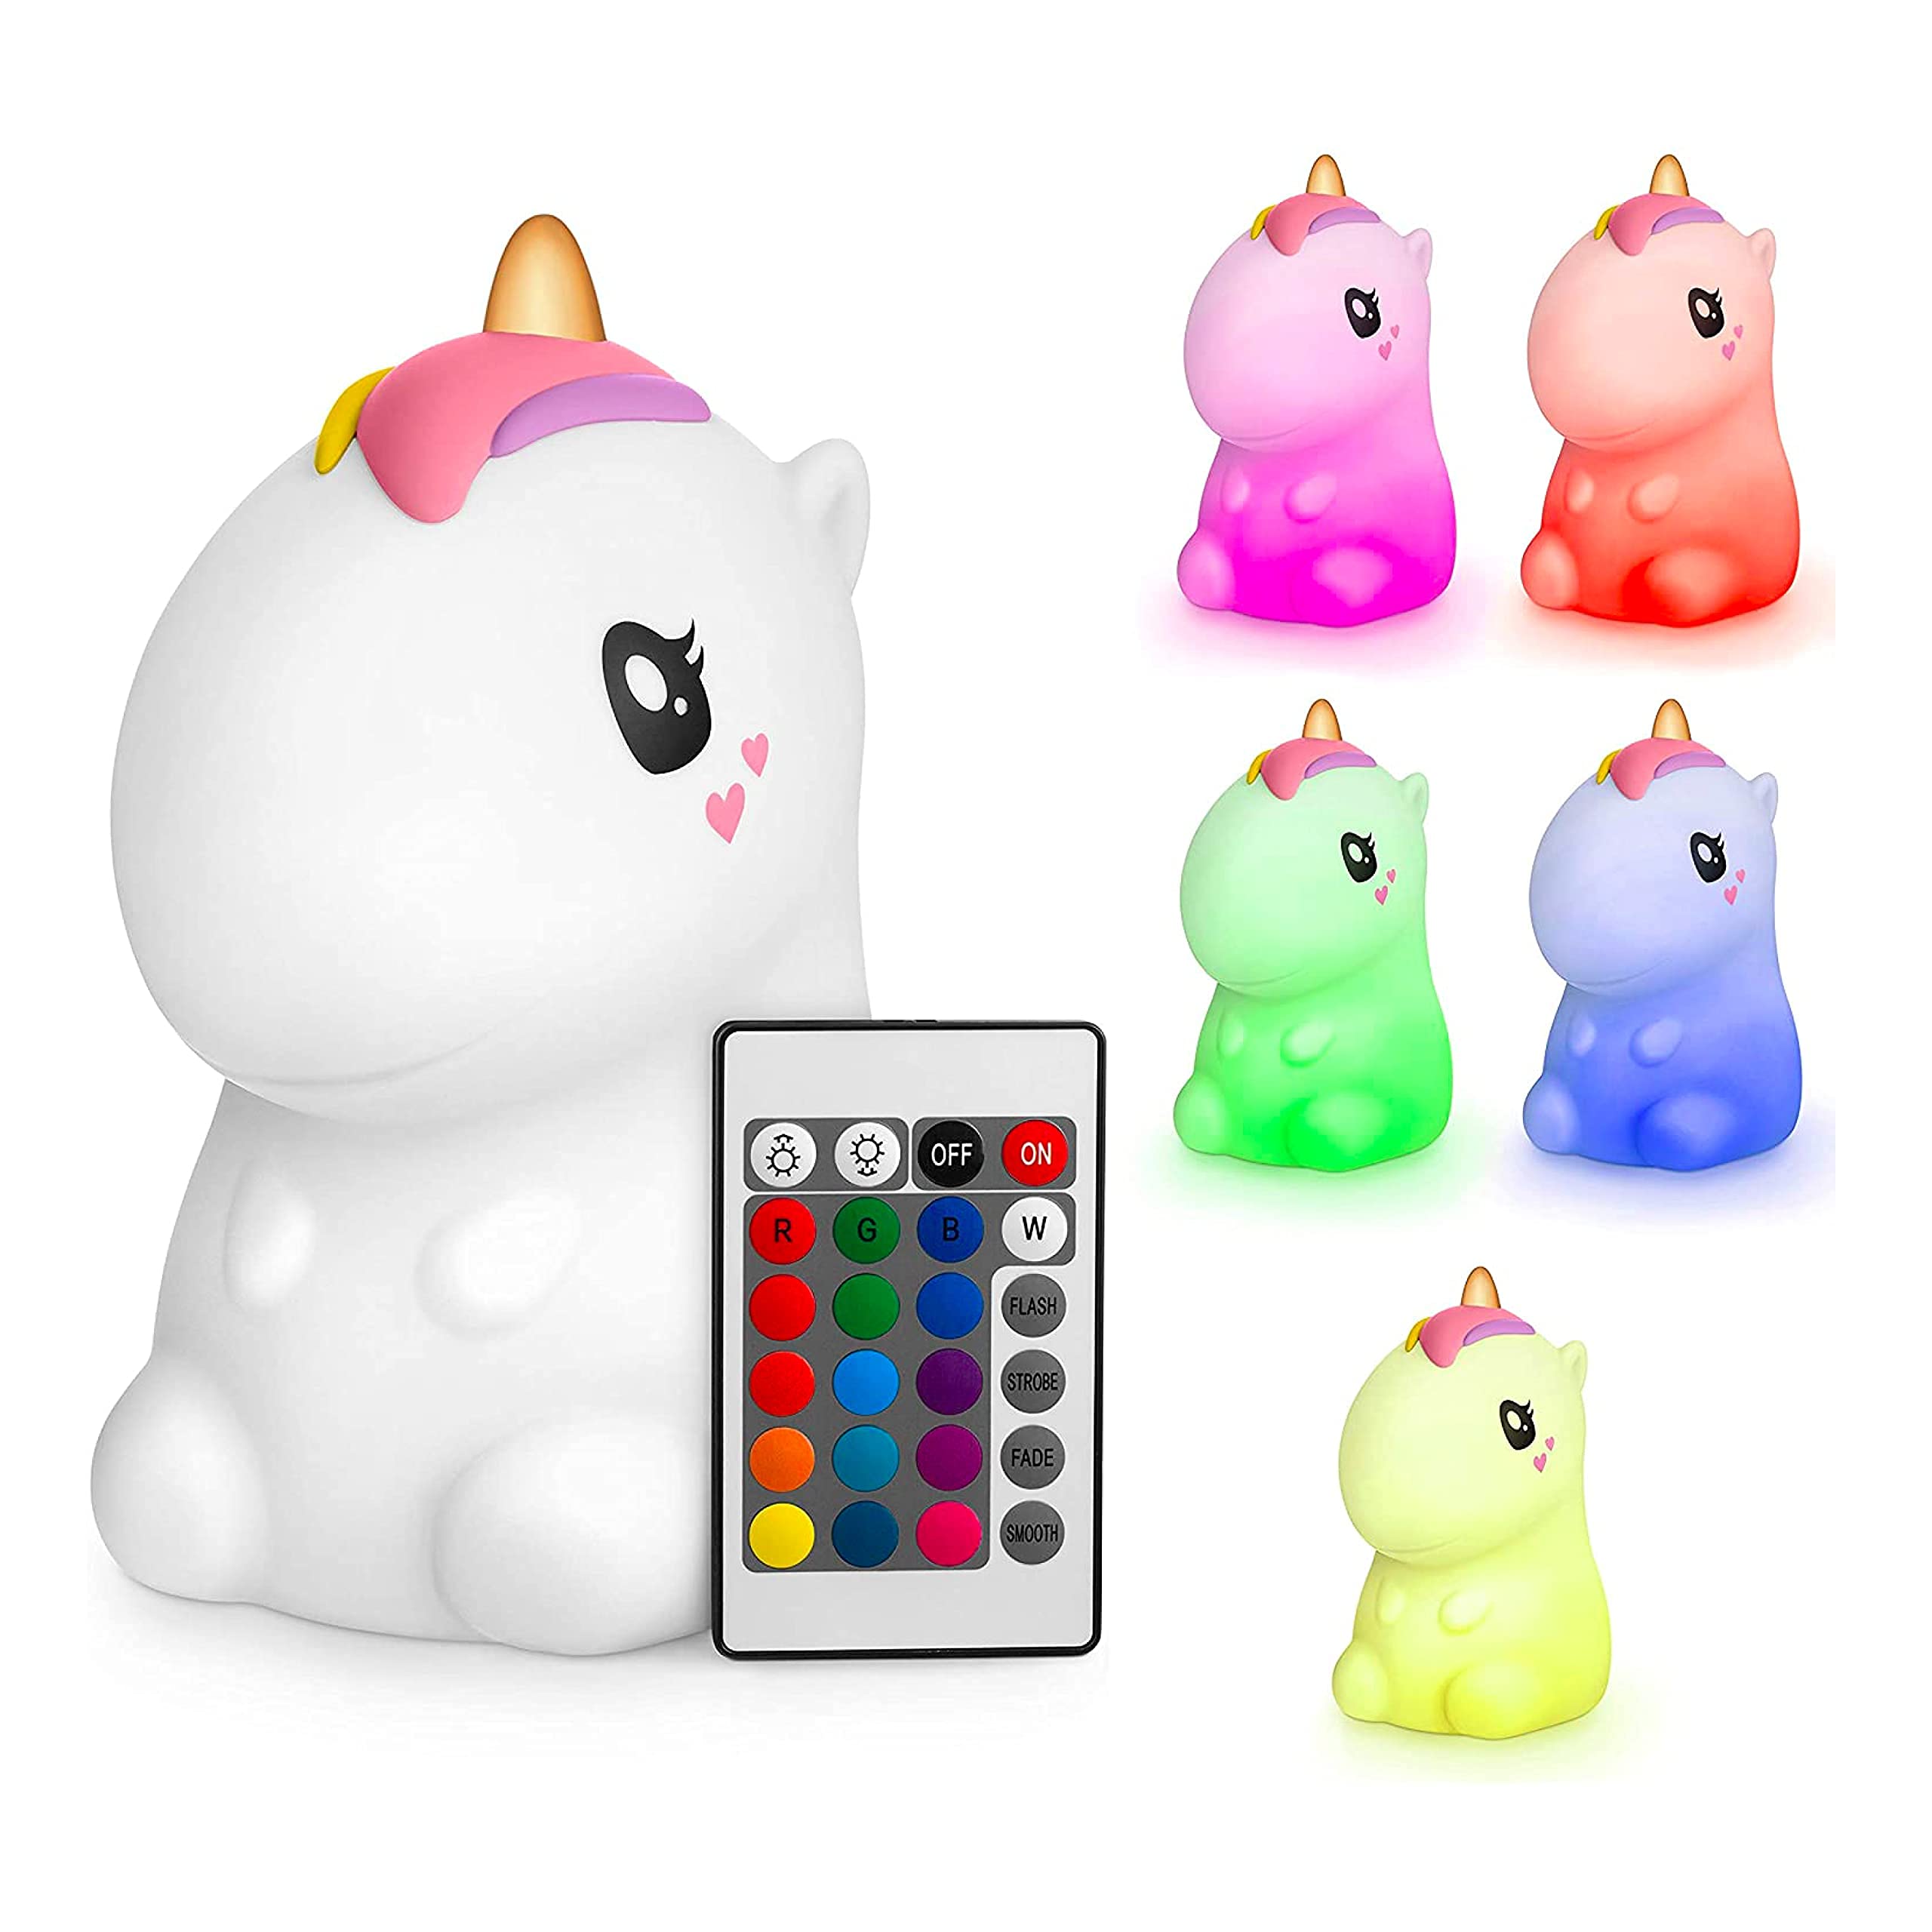 Sweet Ponies Rechargeable LED Night Light, Silicone Lamp for Children with Remote Control